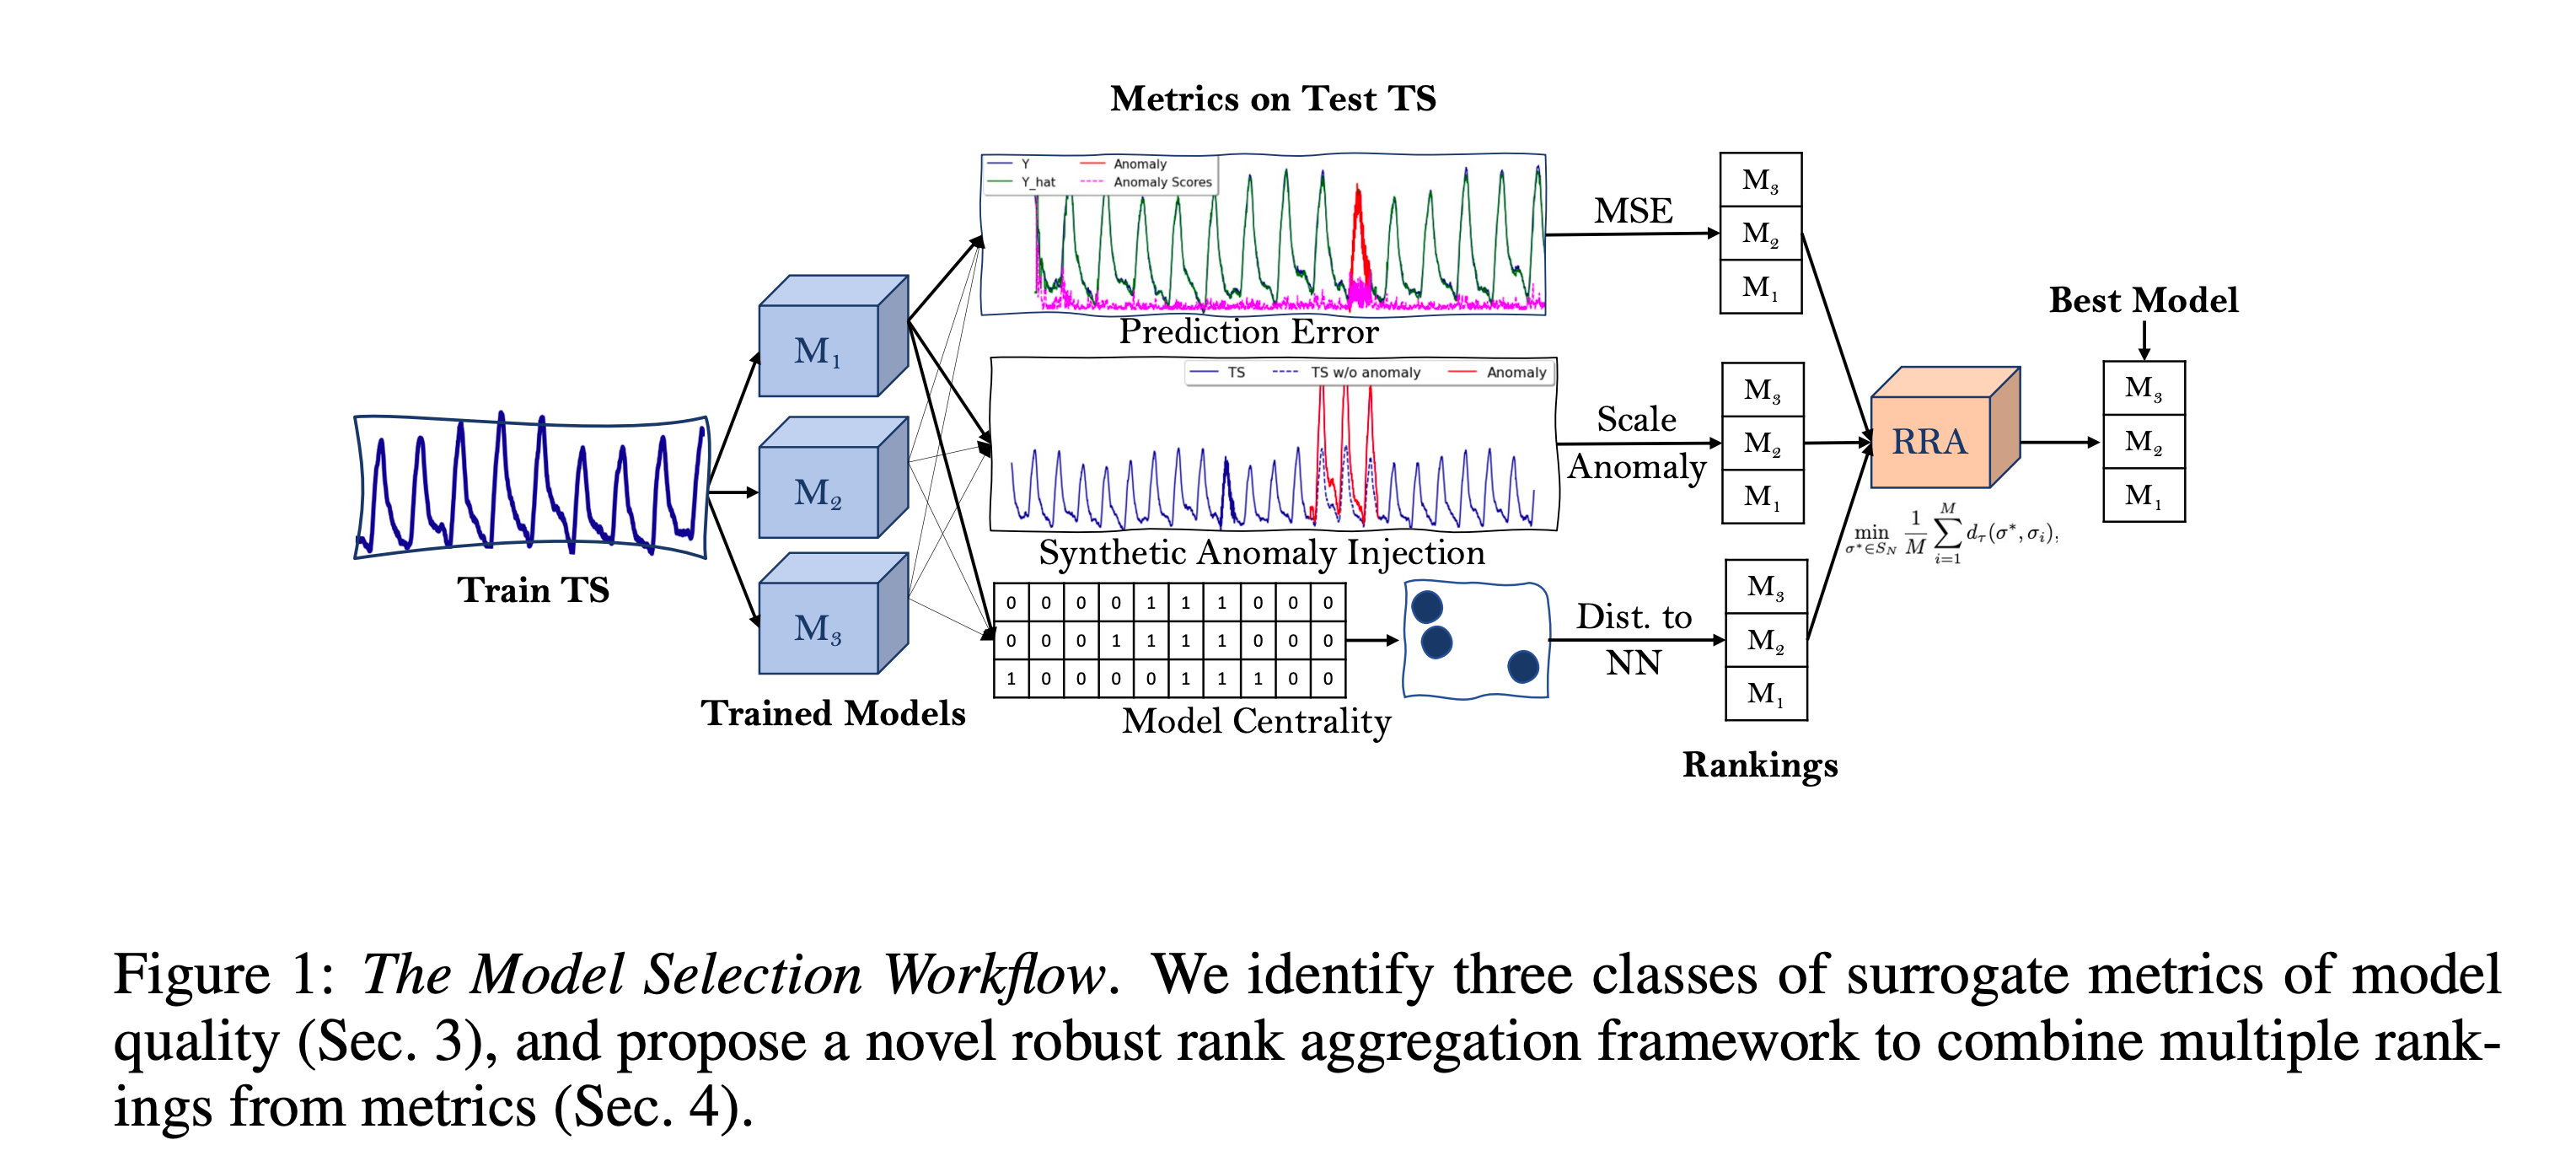 The Model Selection Workflow